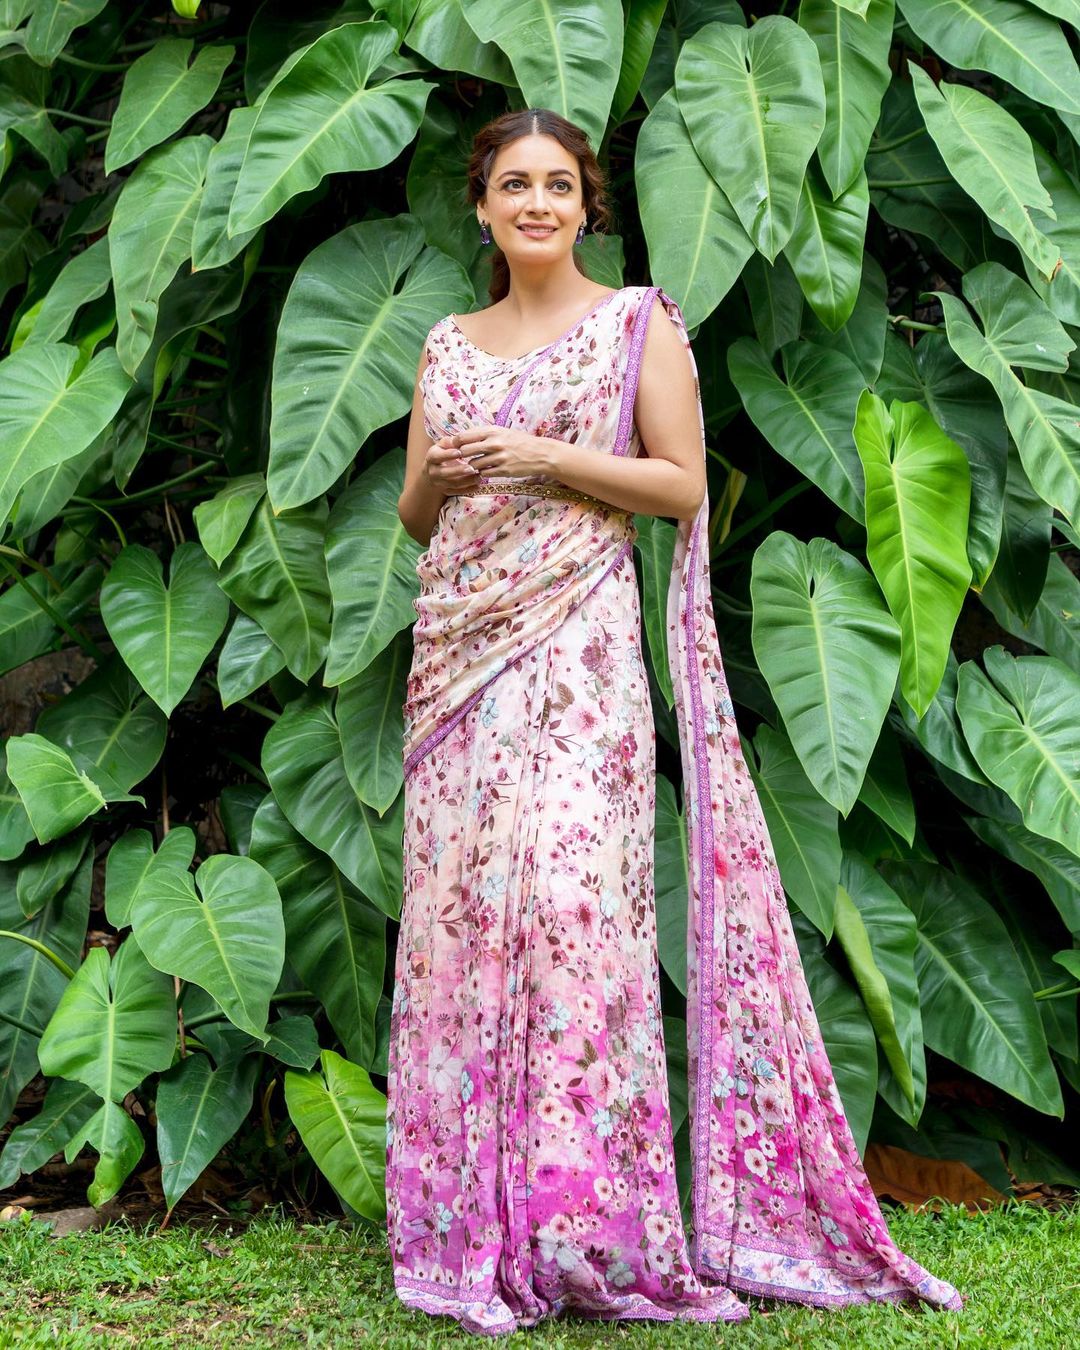 Dia Mirza Gives Spring Vibes In Floral Outfit, Check Out Diva's Stunning Images - Photogallery